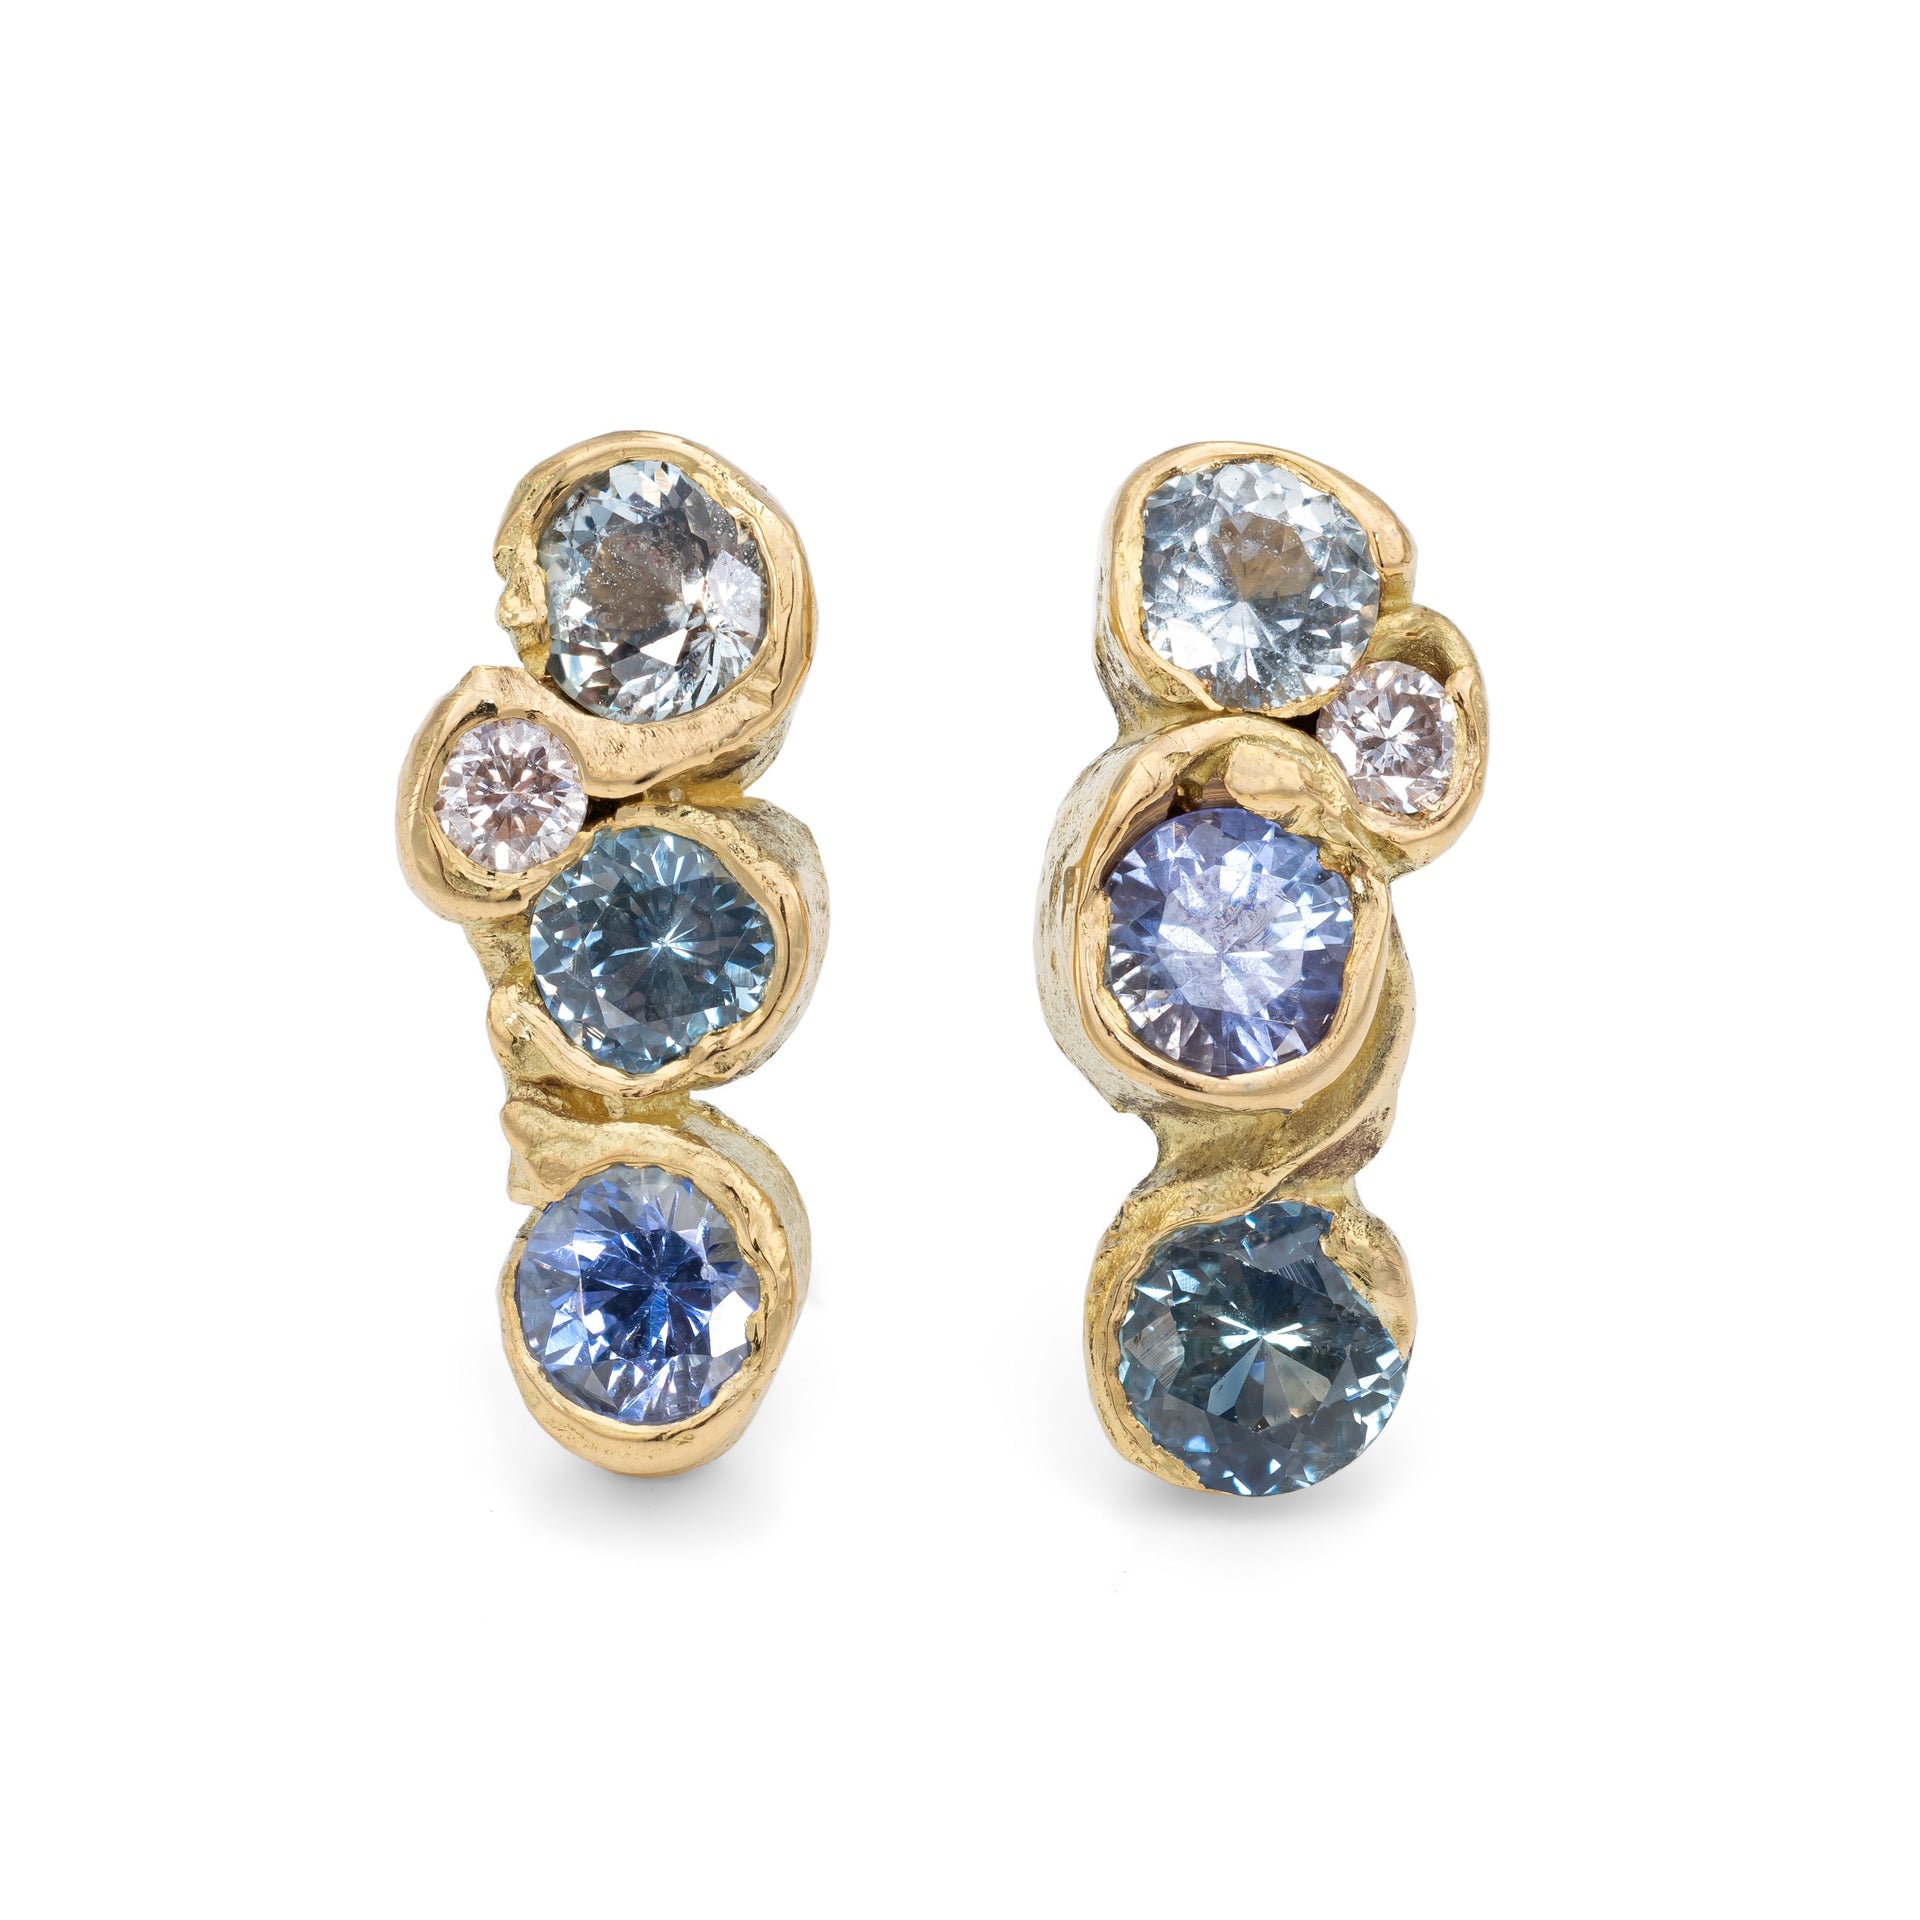 18ct recycled yellow gold stud earrings with sapphires. Cast using the traditional lost wax process by Emily Nixon in Cornwall.